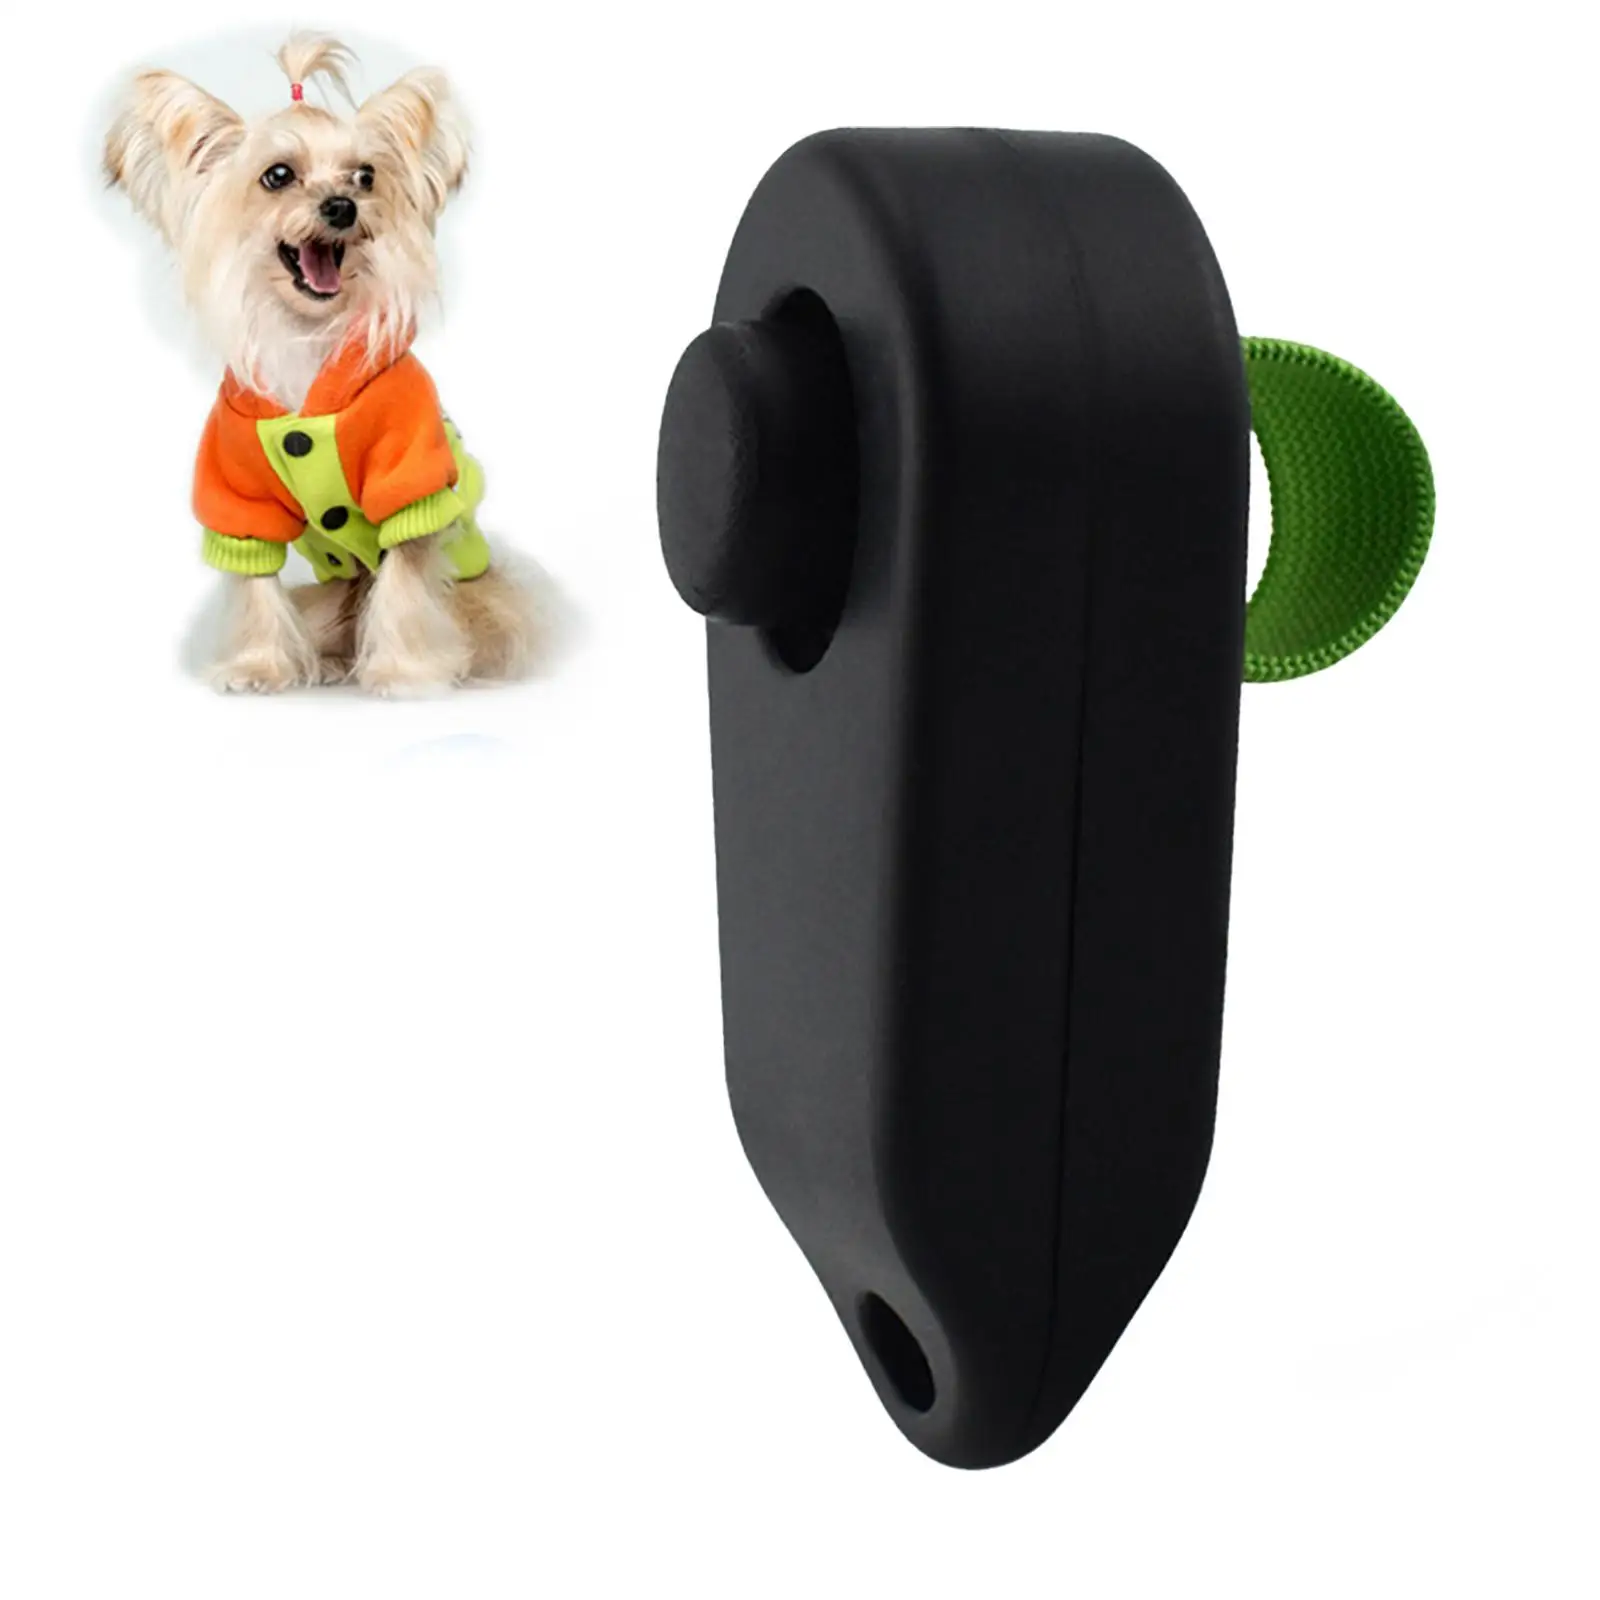 Dog Training Portable Dog Click Trainer Aid Tool Pet Training Click Sound, Guide Obedience Dog Supplies